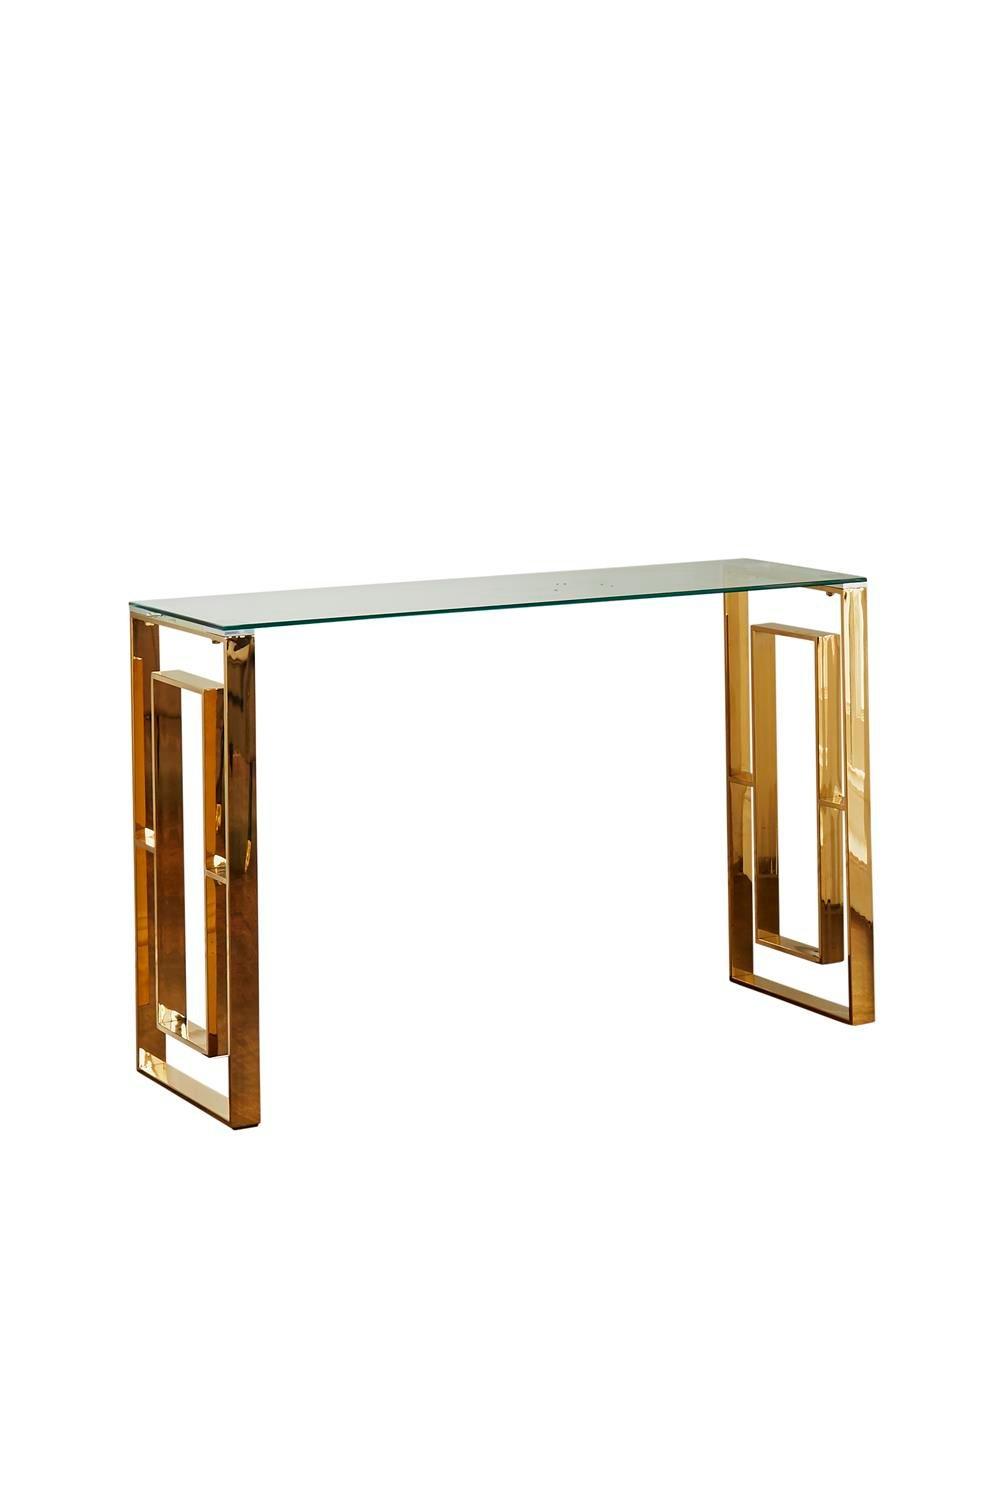 Milano Gold Plated Console Table